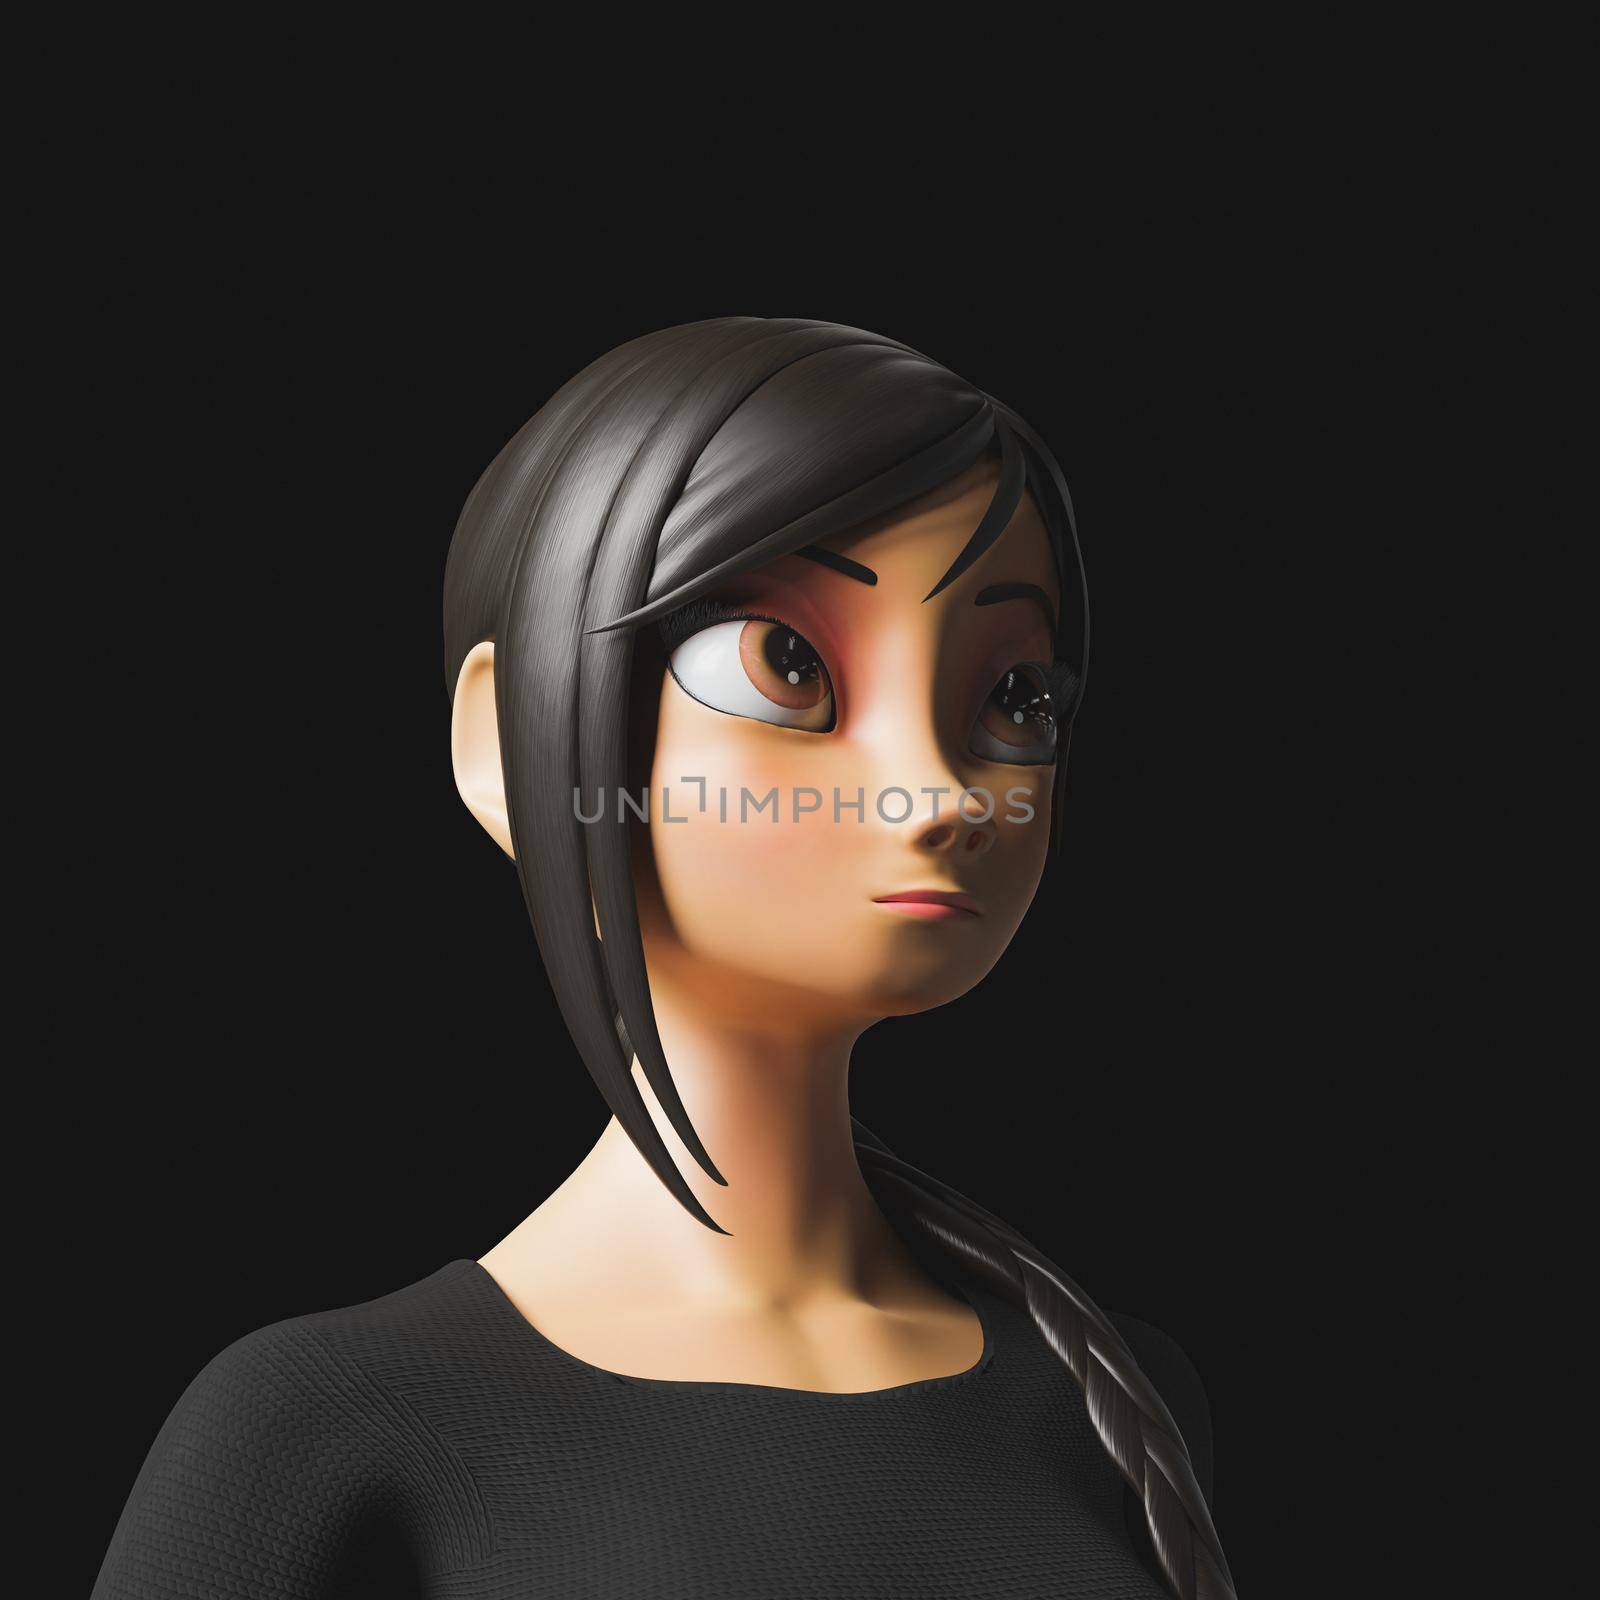 portrait of a girl with side lighting and dark background. 3d render stylized character